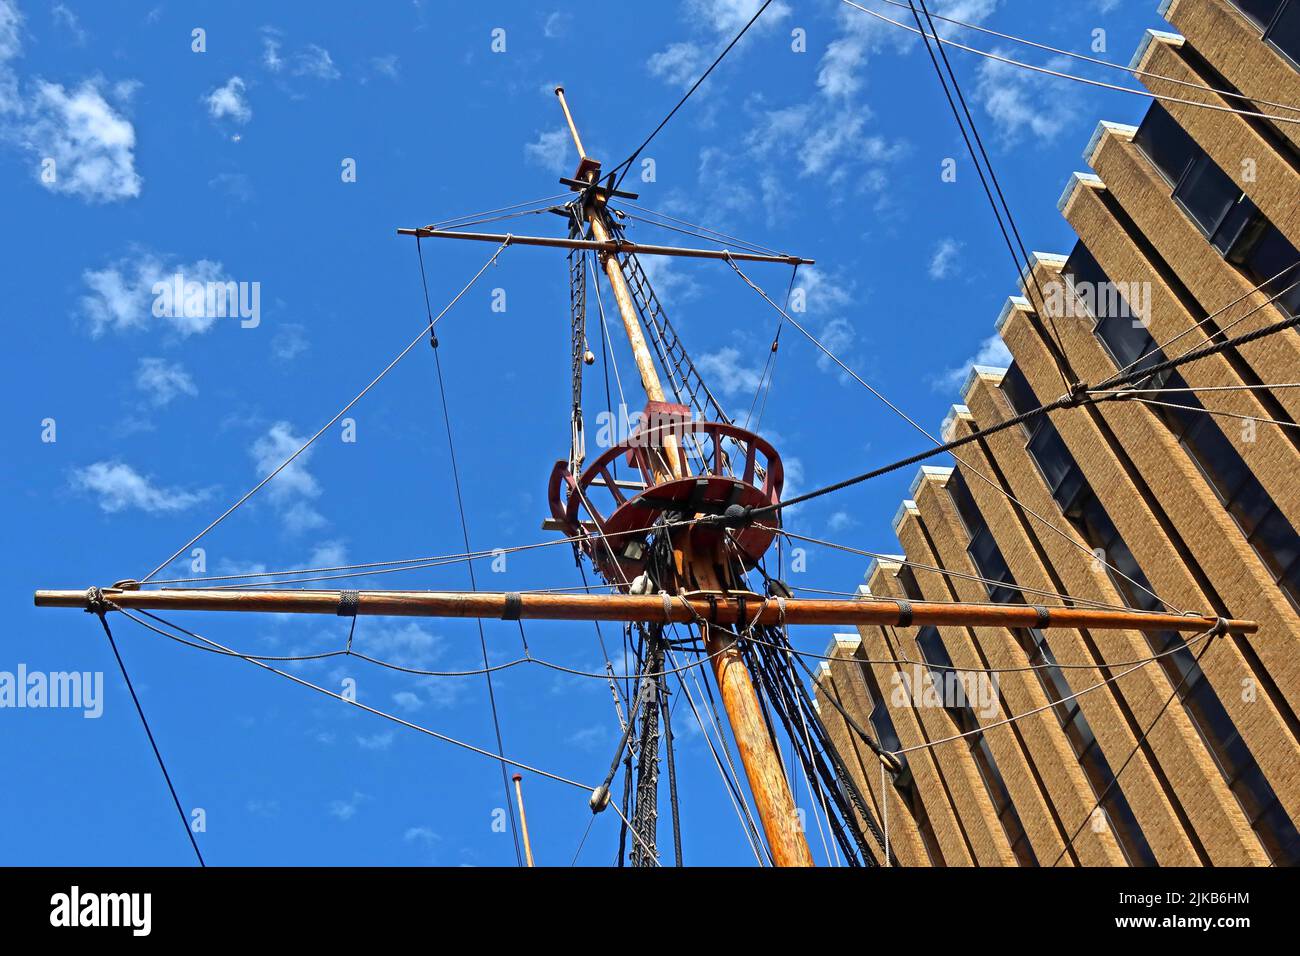 Golden Hind sailing ship (1973) , in St Mary Overies Dock, Cathedral Street, ,Southwark, London, England, UK,SE1 9DE - free landing Stock Photo